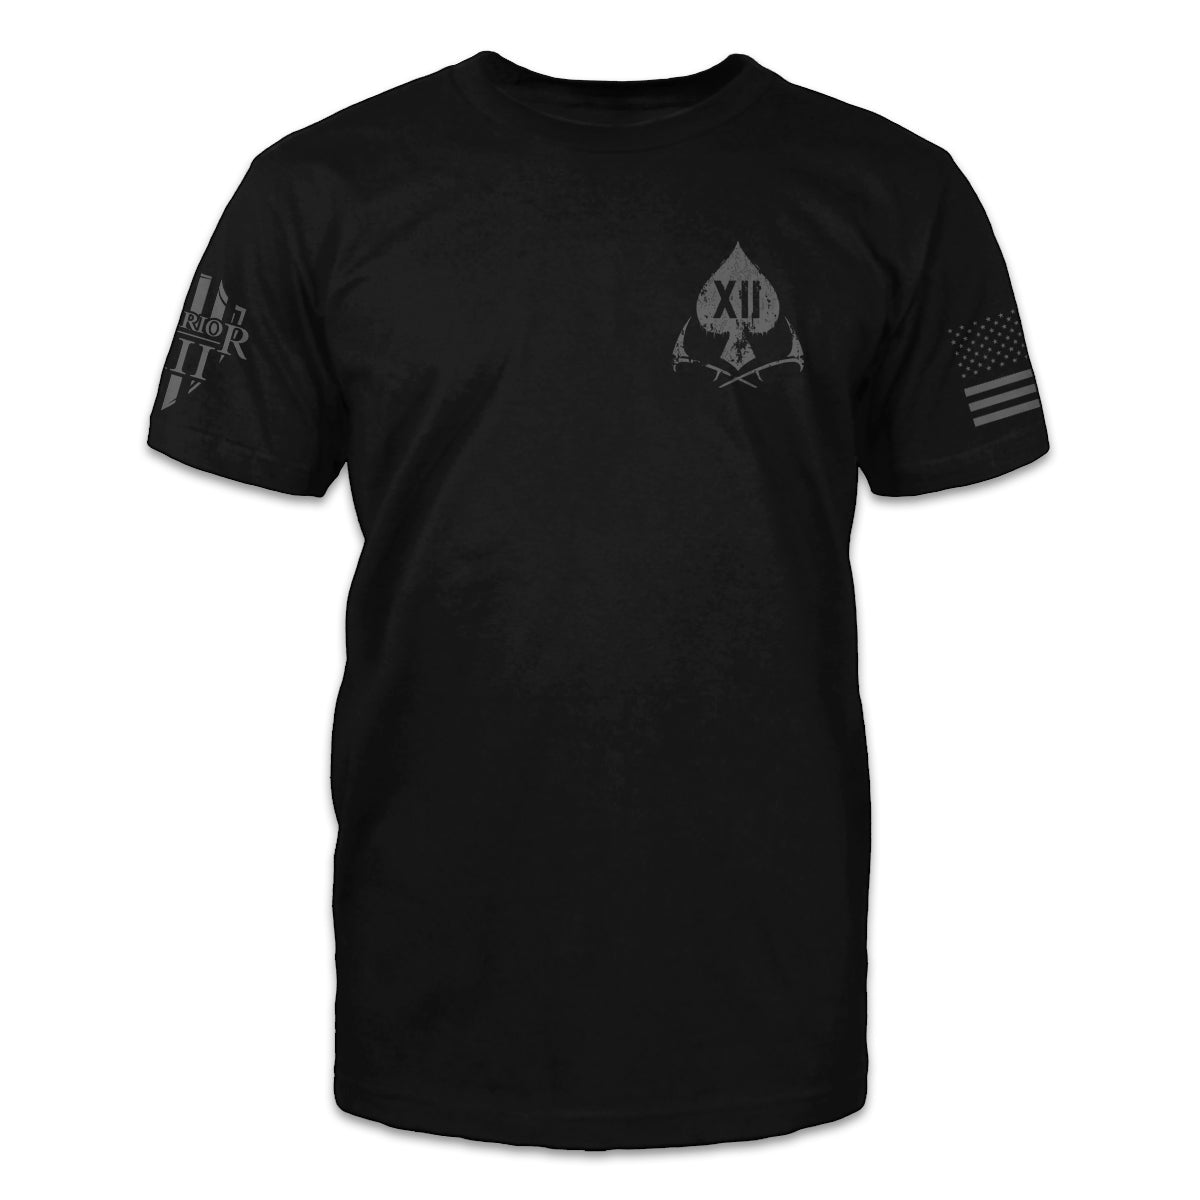 A black t-shirt with an ace printed on the front left chest.